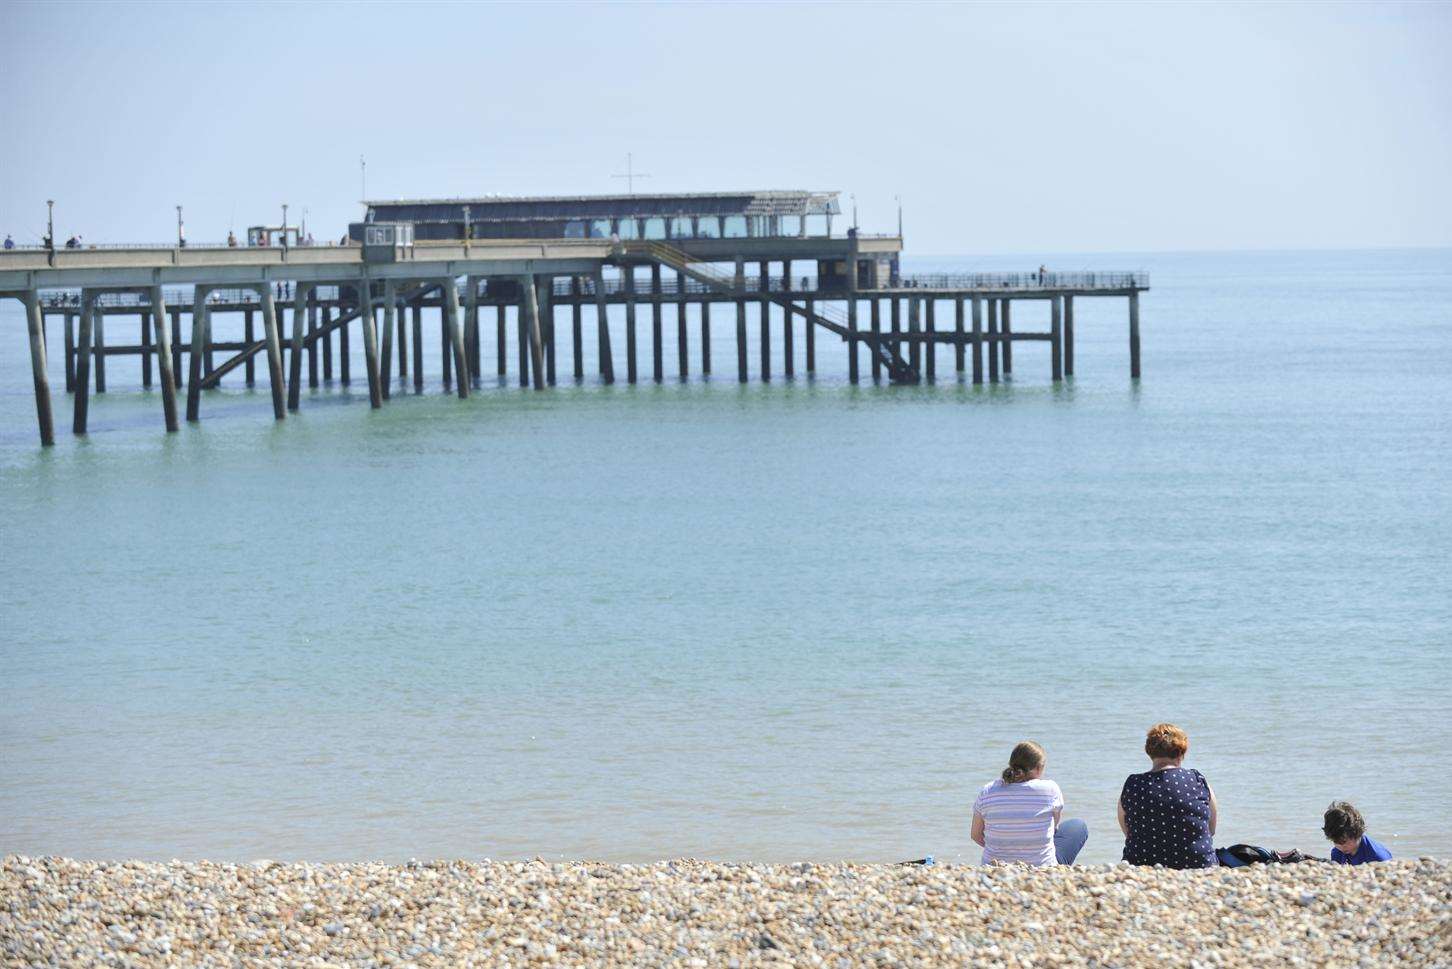 Deal seafront is among the areas of Kent to have been bathed in sunshine. Picture: Tony Flashman